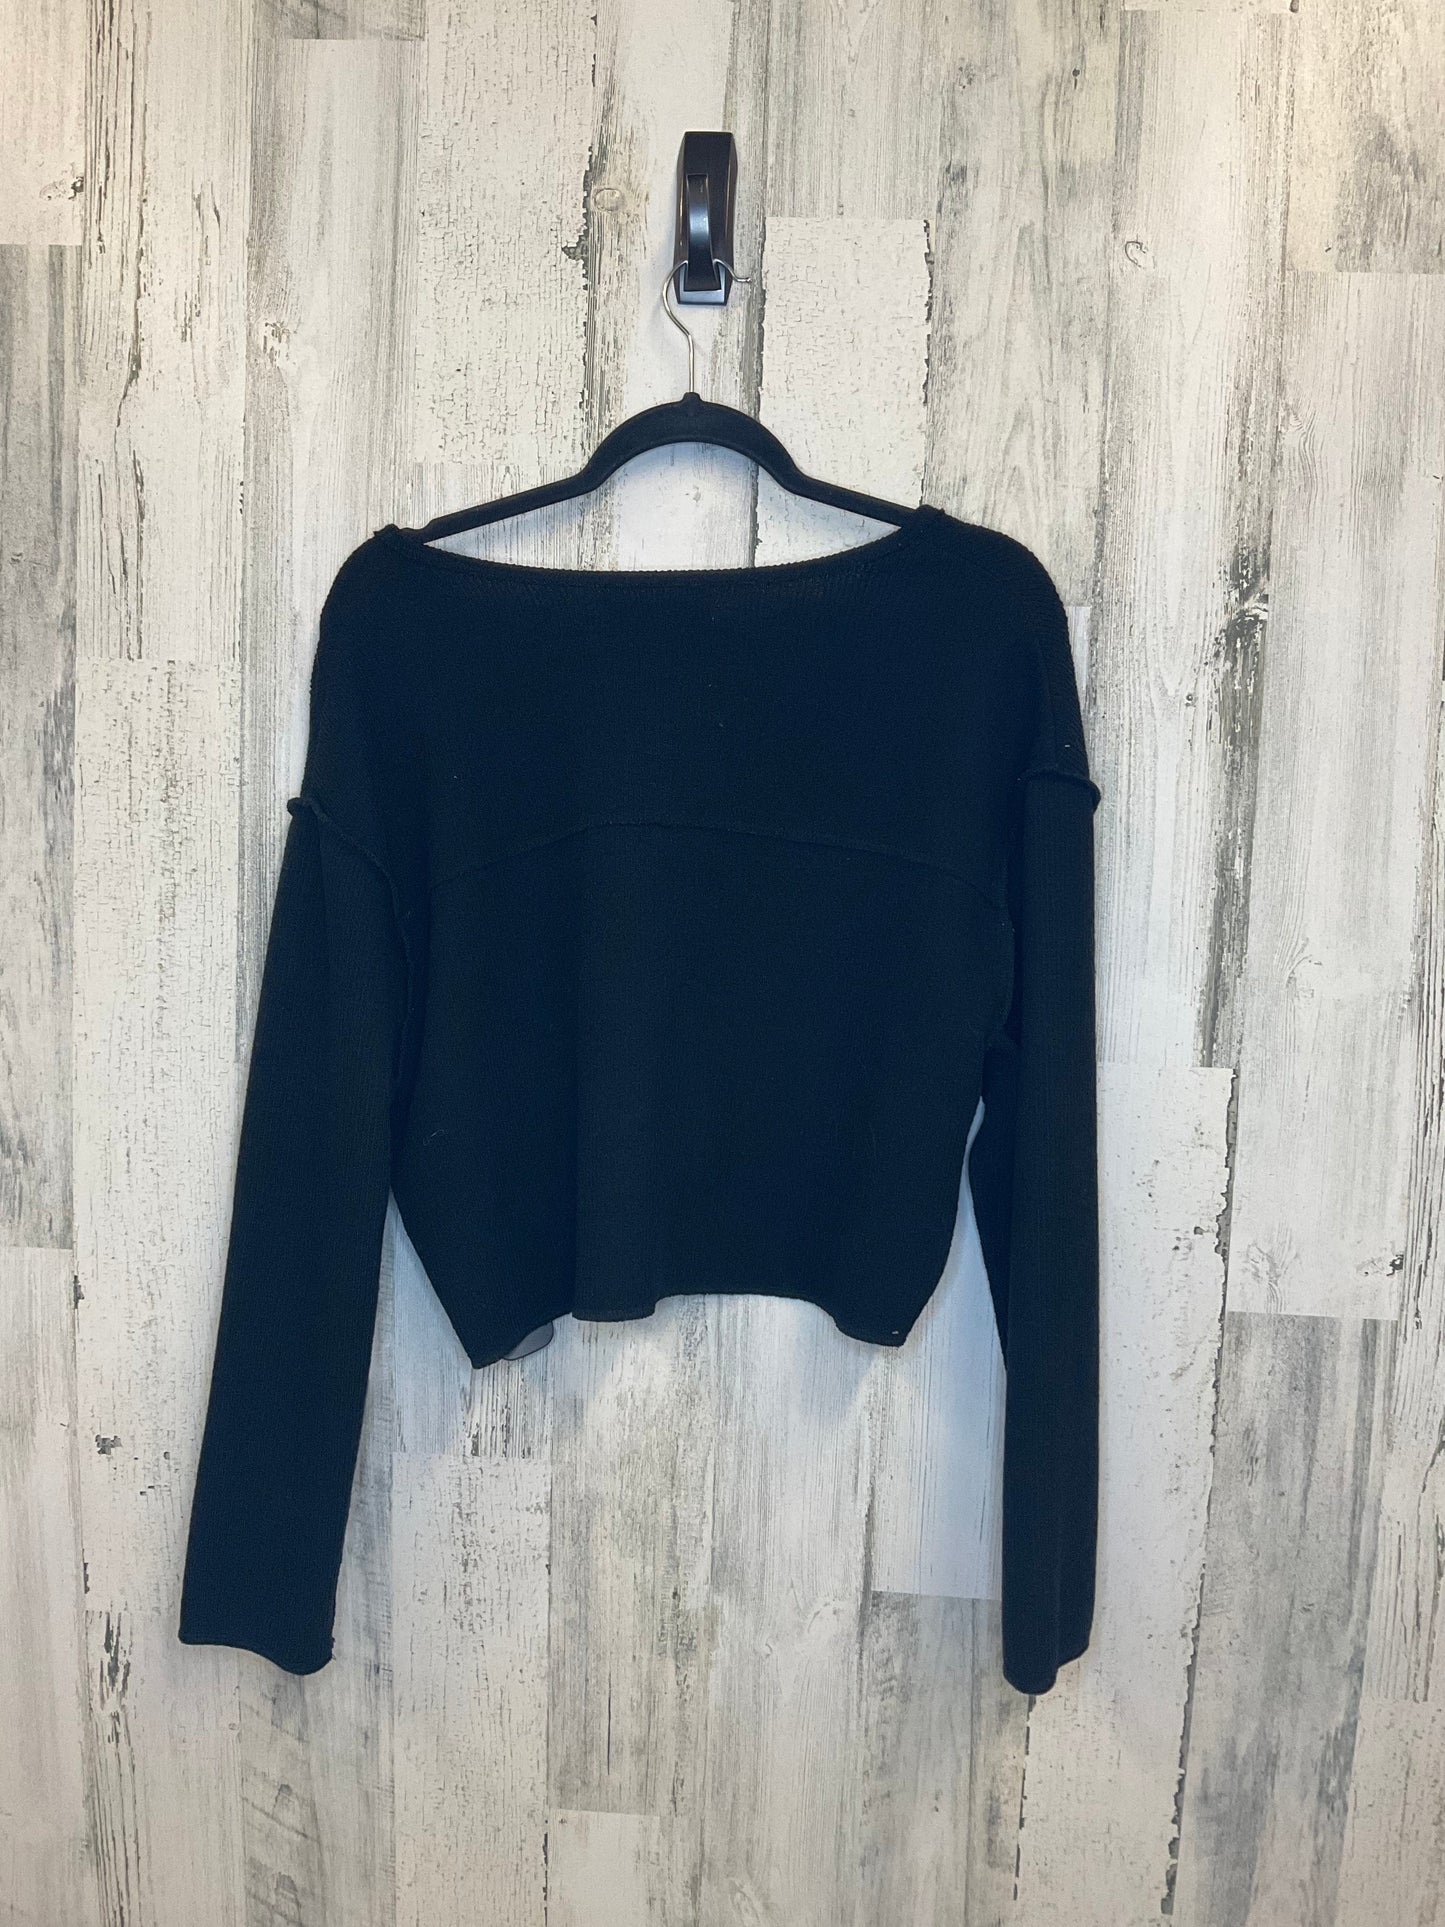 Top Long Sleeve Basic By Urban Outfitters  Size: S